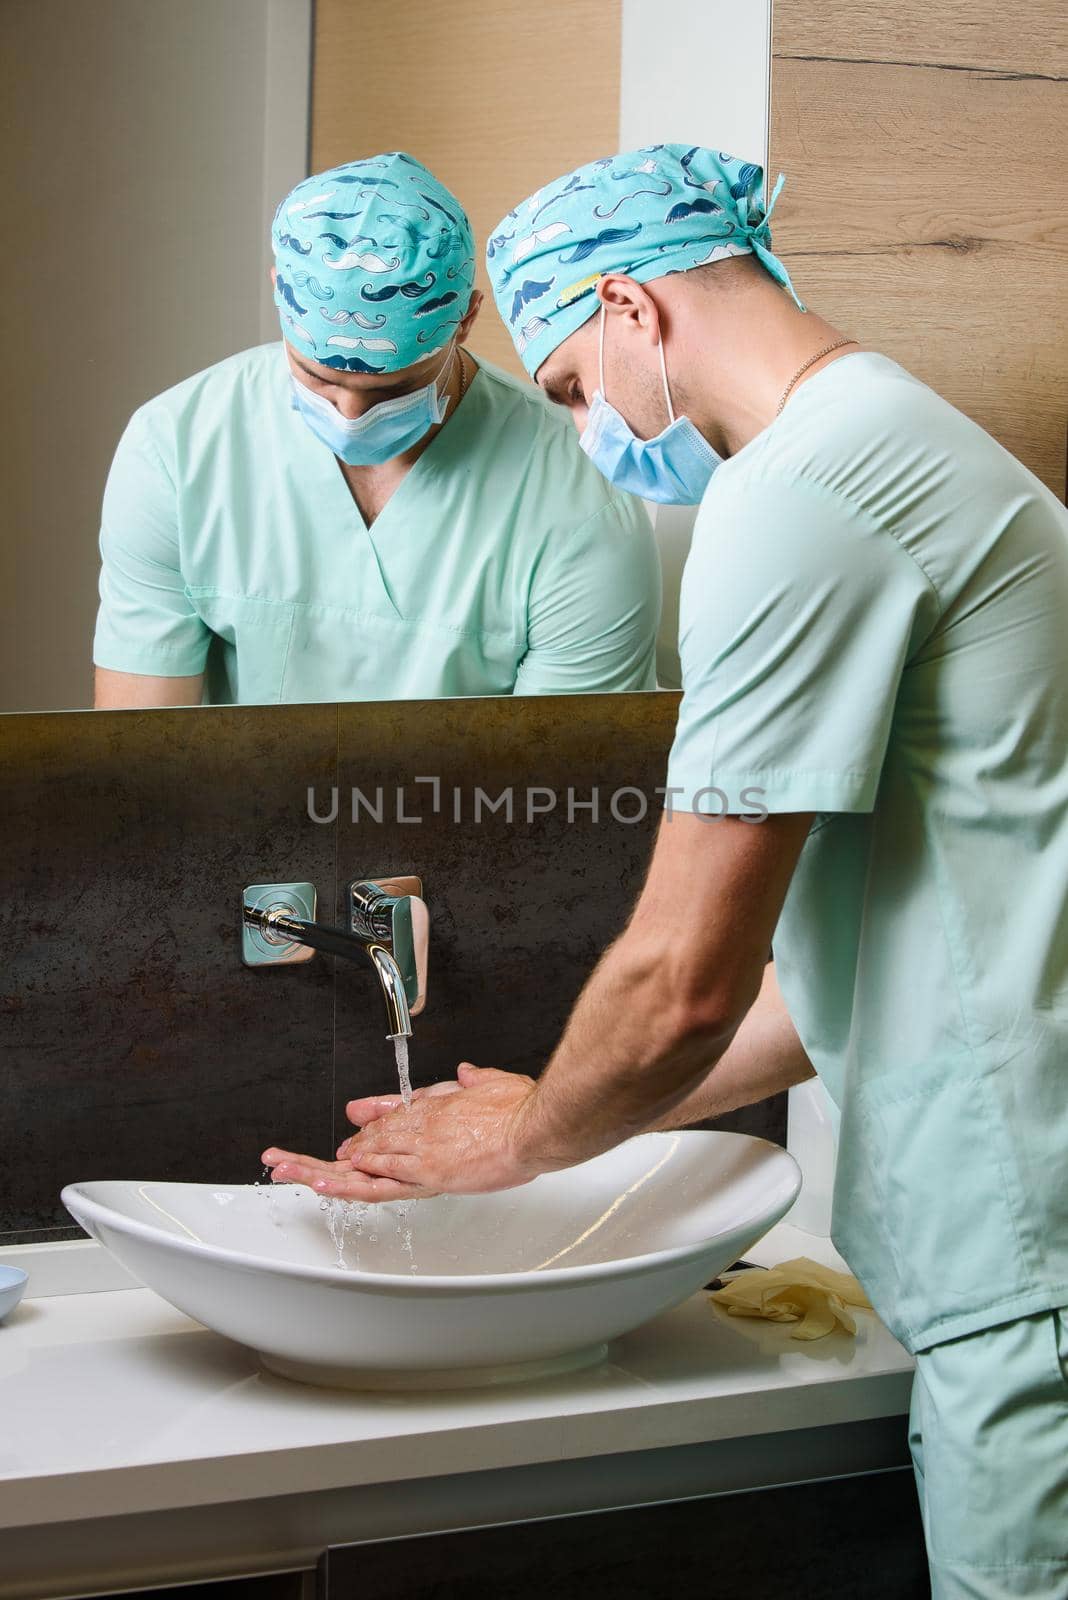 Doctors looks at the cleanliness of his hands after washing under a stream of water. Wash your hands under running water by Rabizo